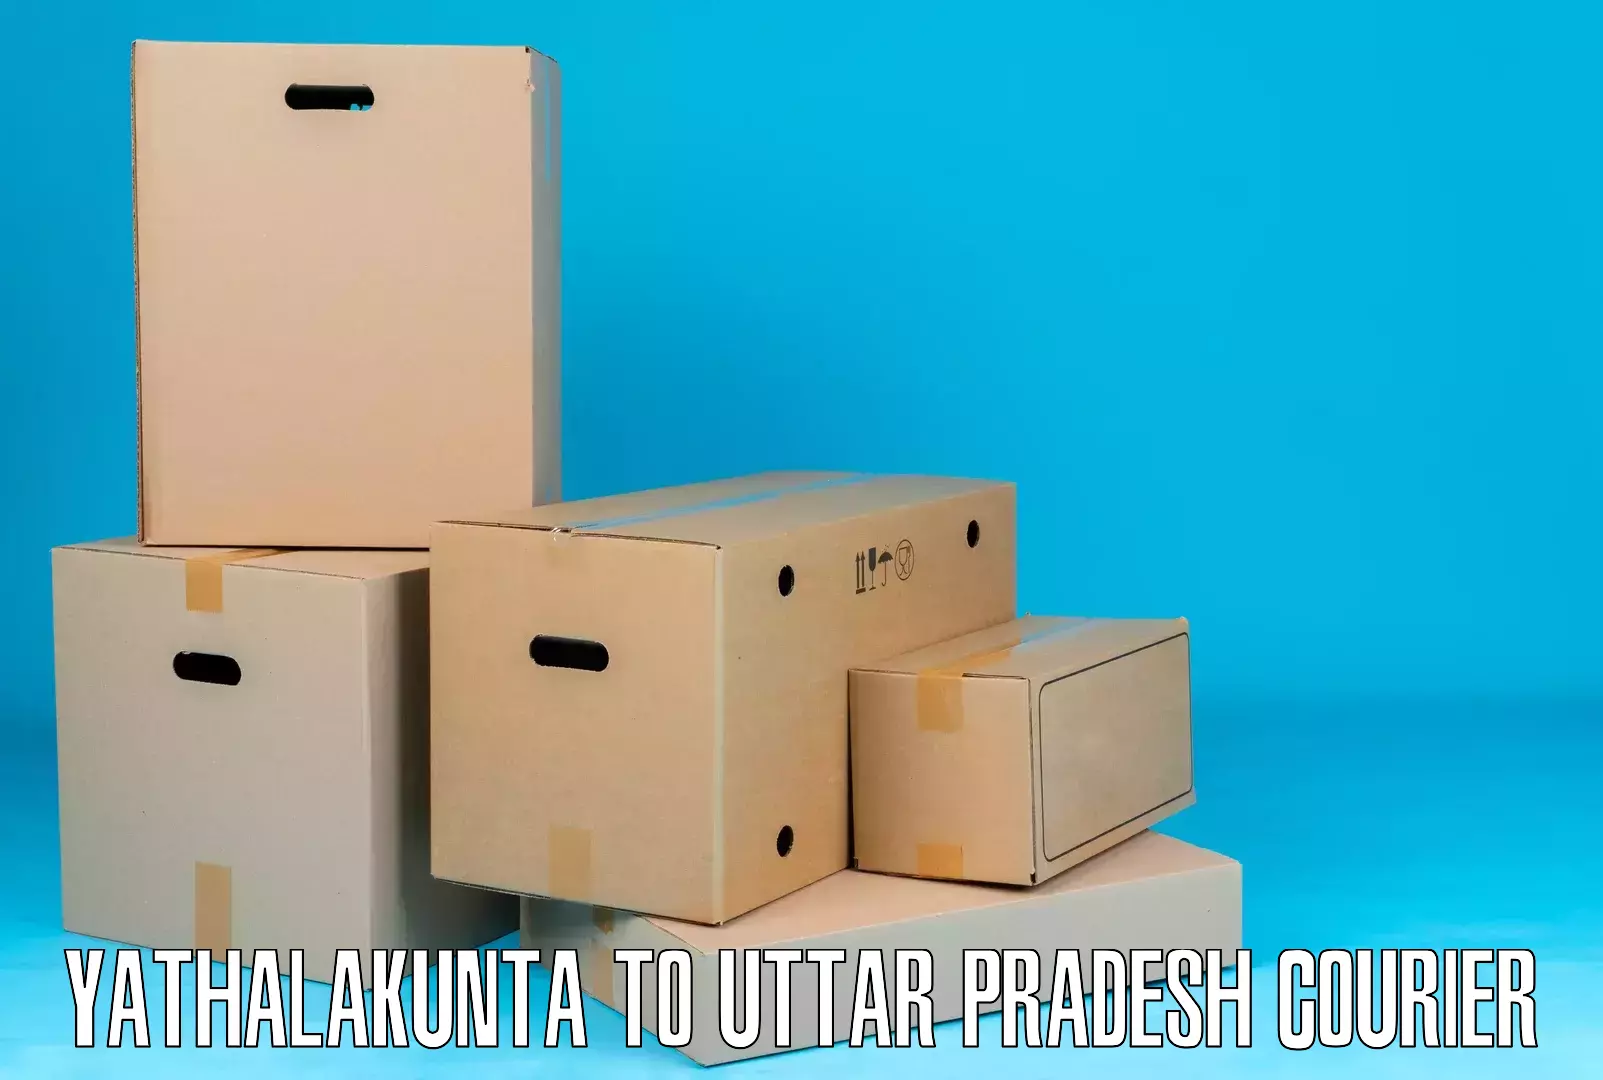 Full-service courier options Yathalakunta to Atrauli